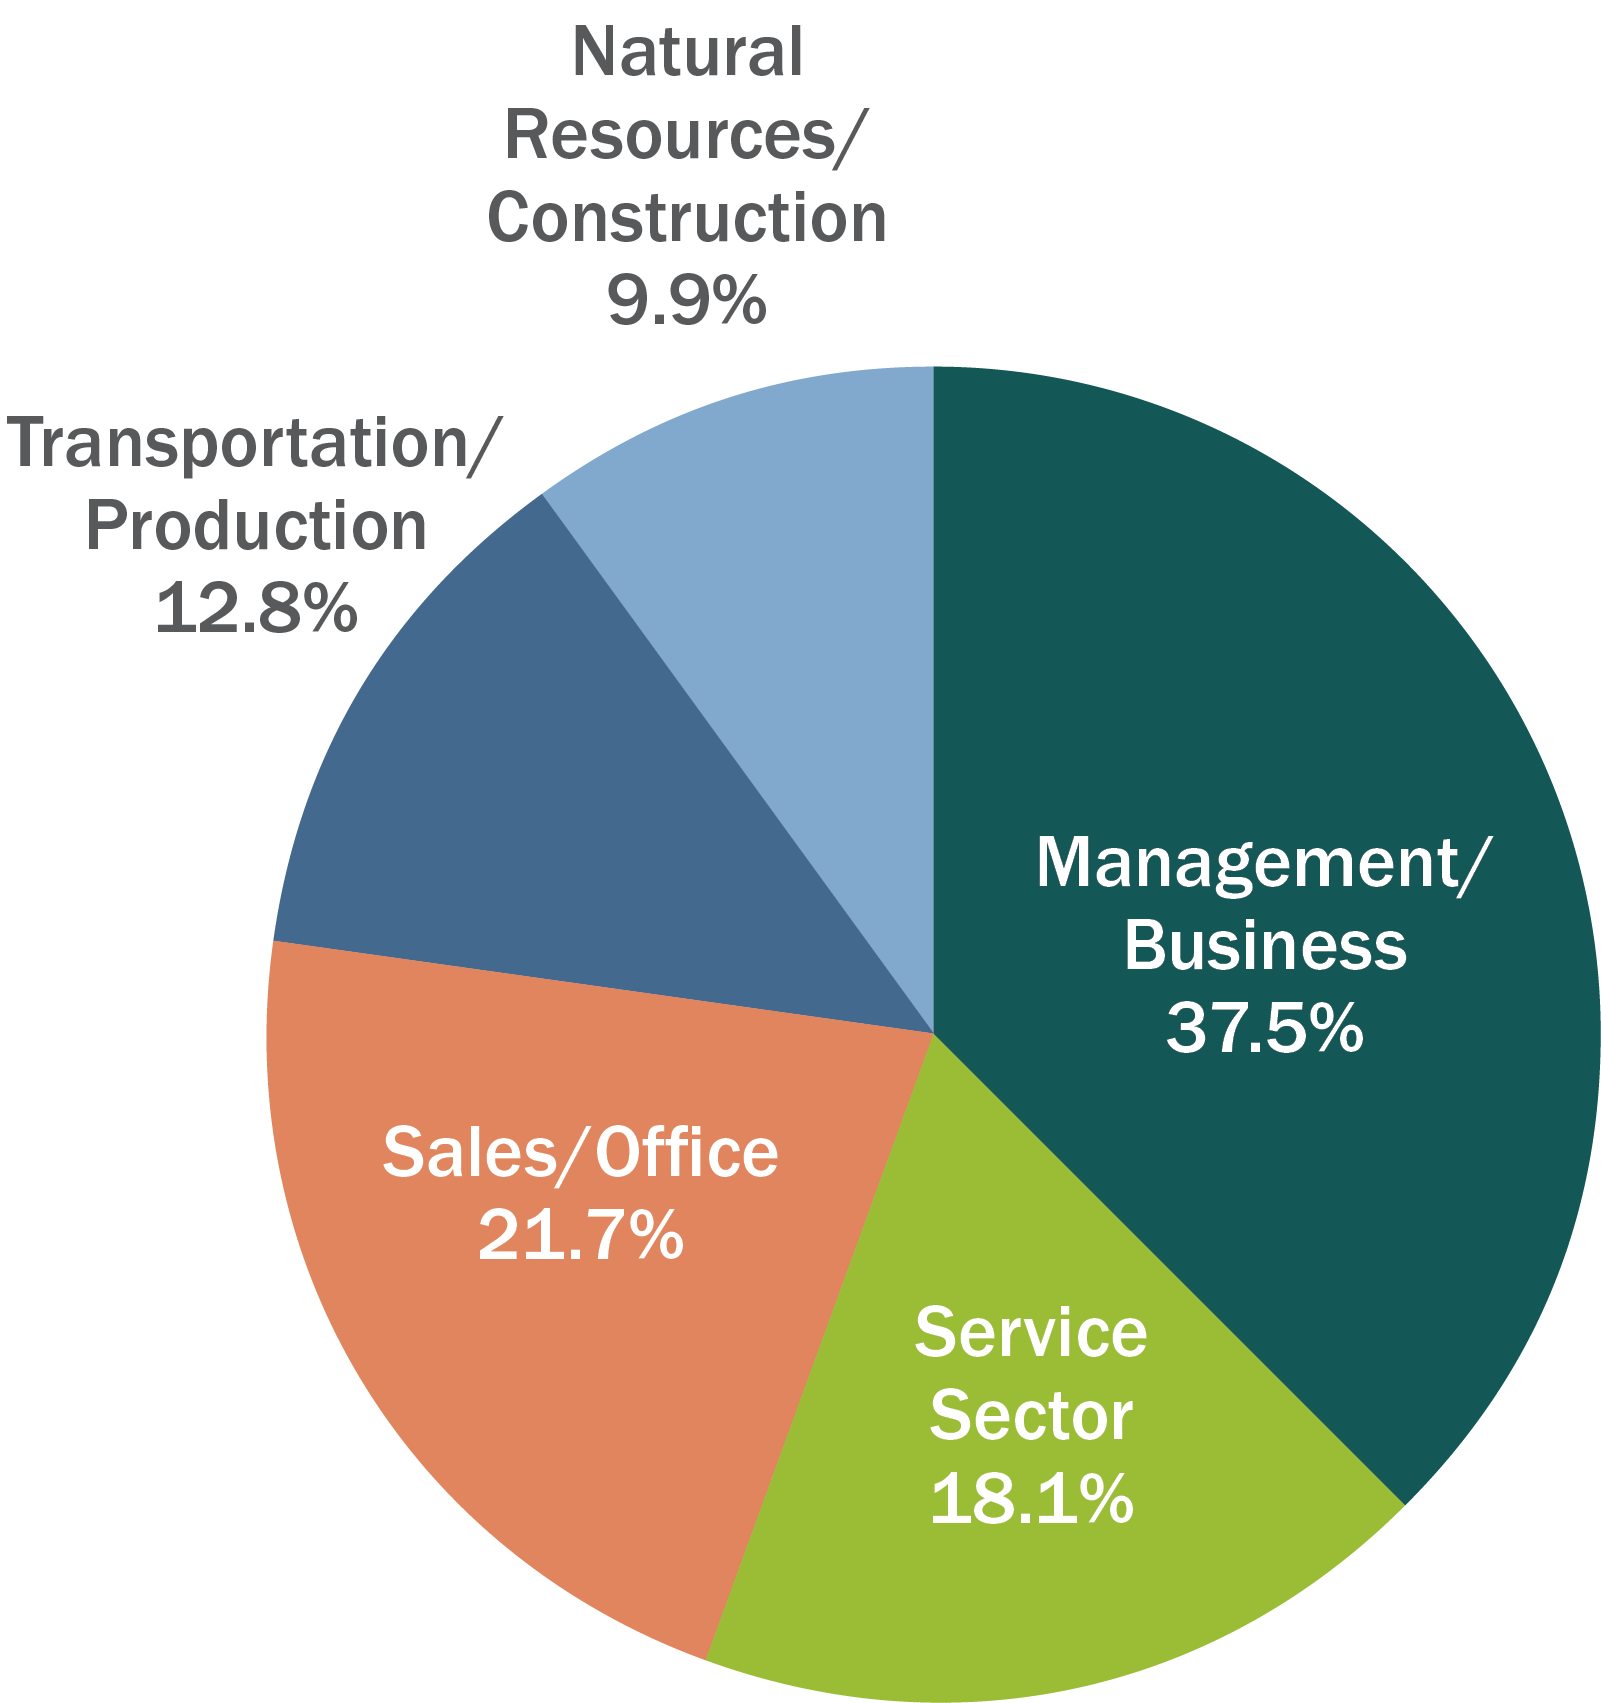 Chart shows 37.5% of residents are employed in the business sector, 21.7% is sales, 12.8% in transportation and 9.9% in natural resources.